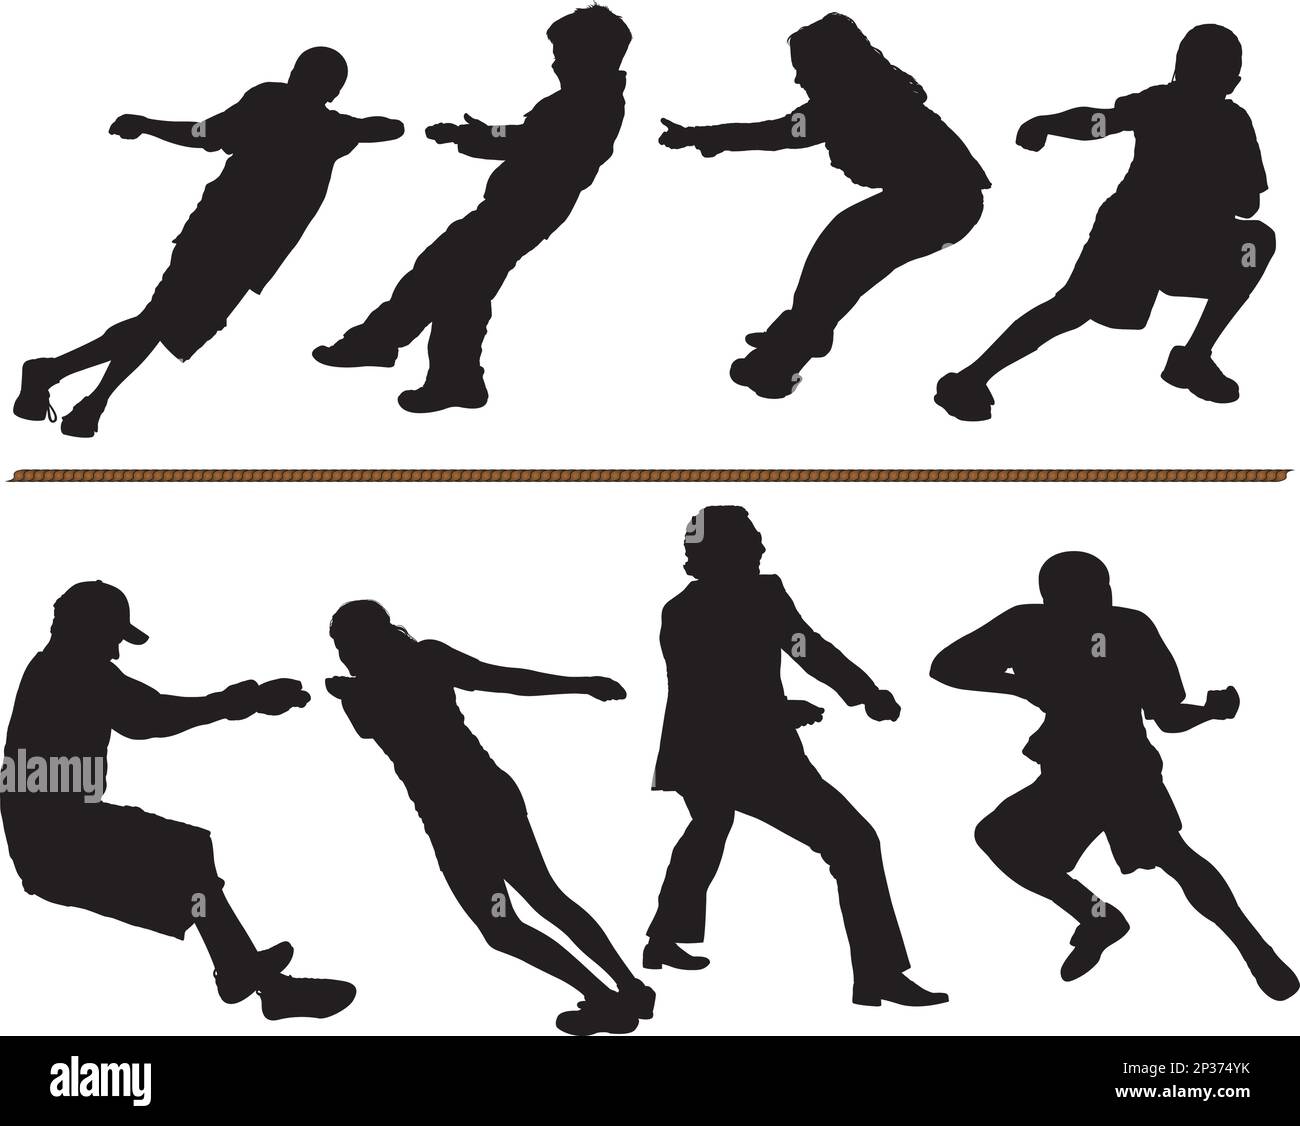 Tug of war or rope pulling vector silhouettes on white background